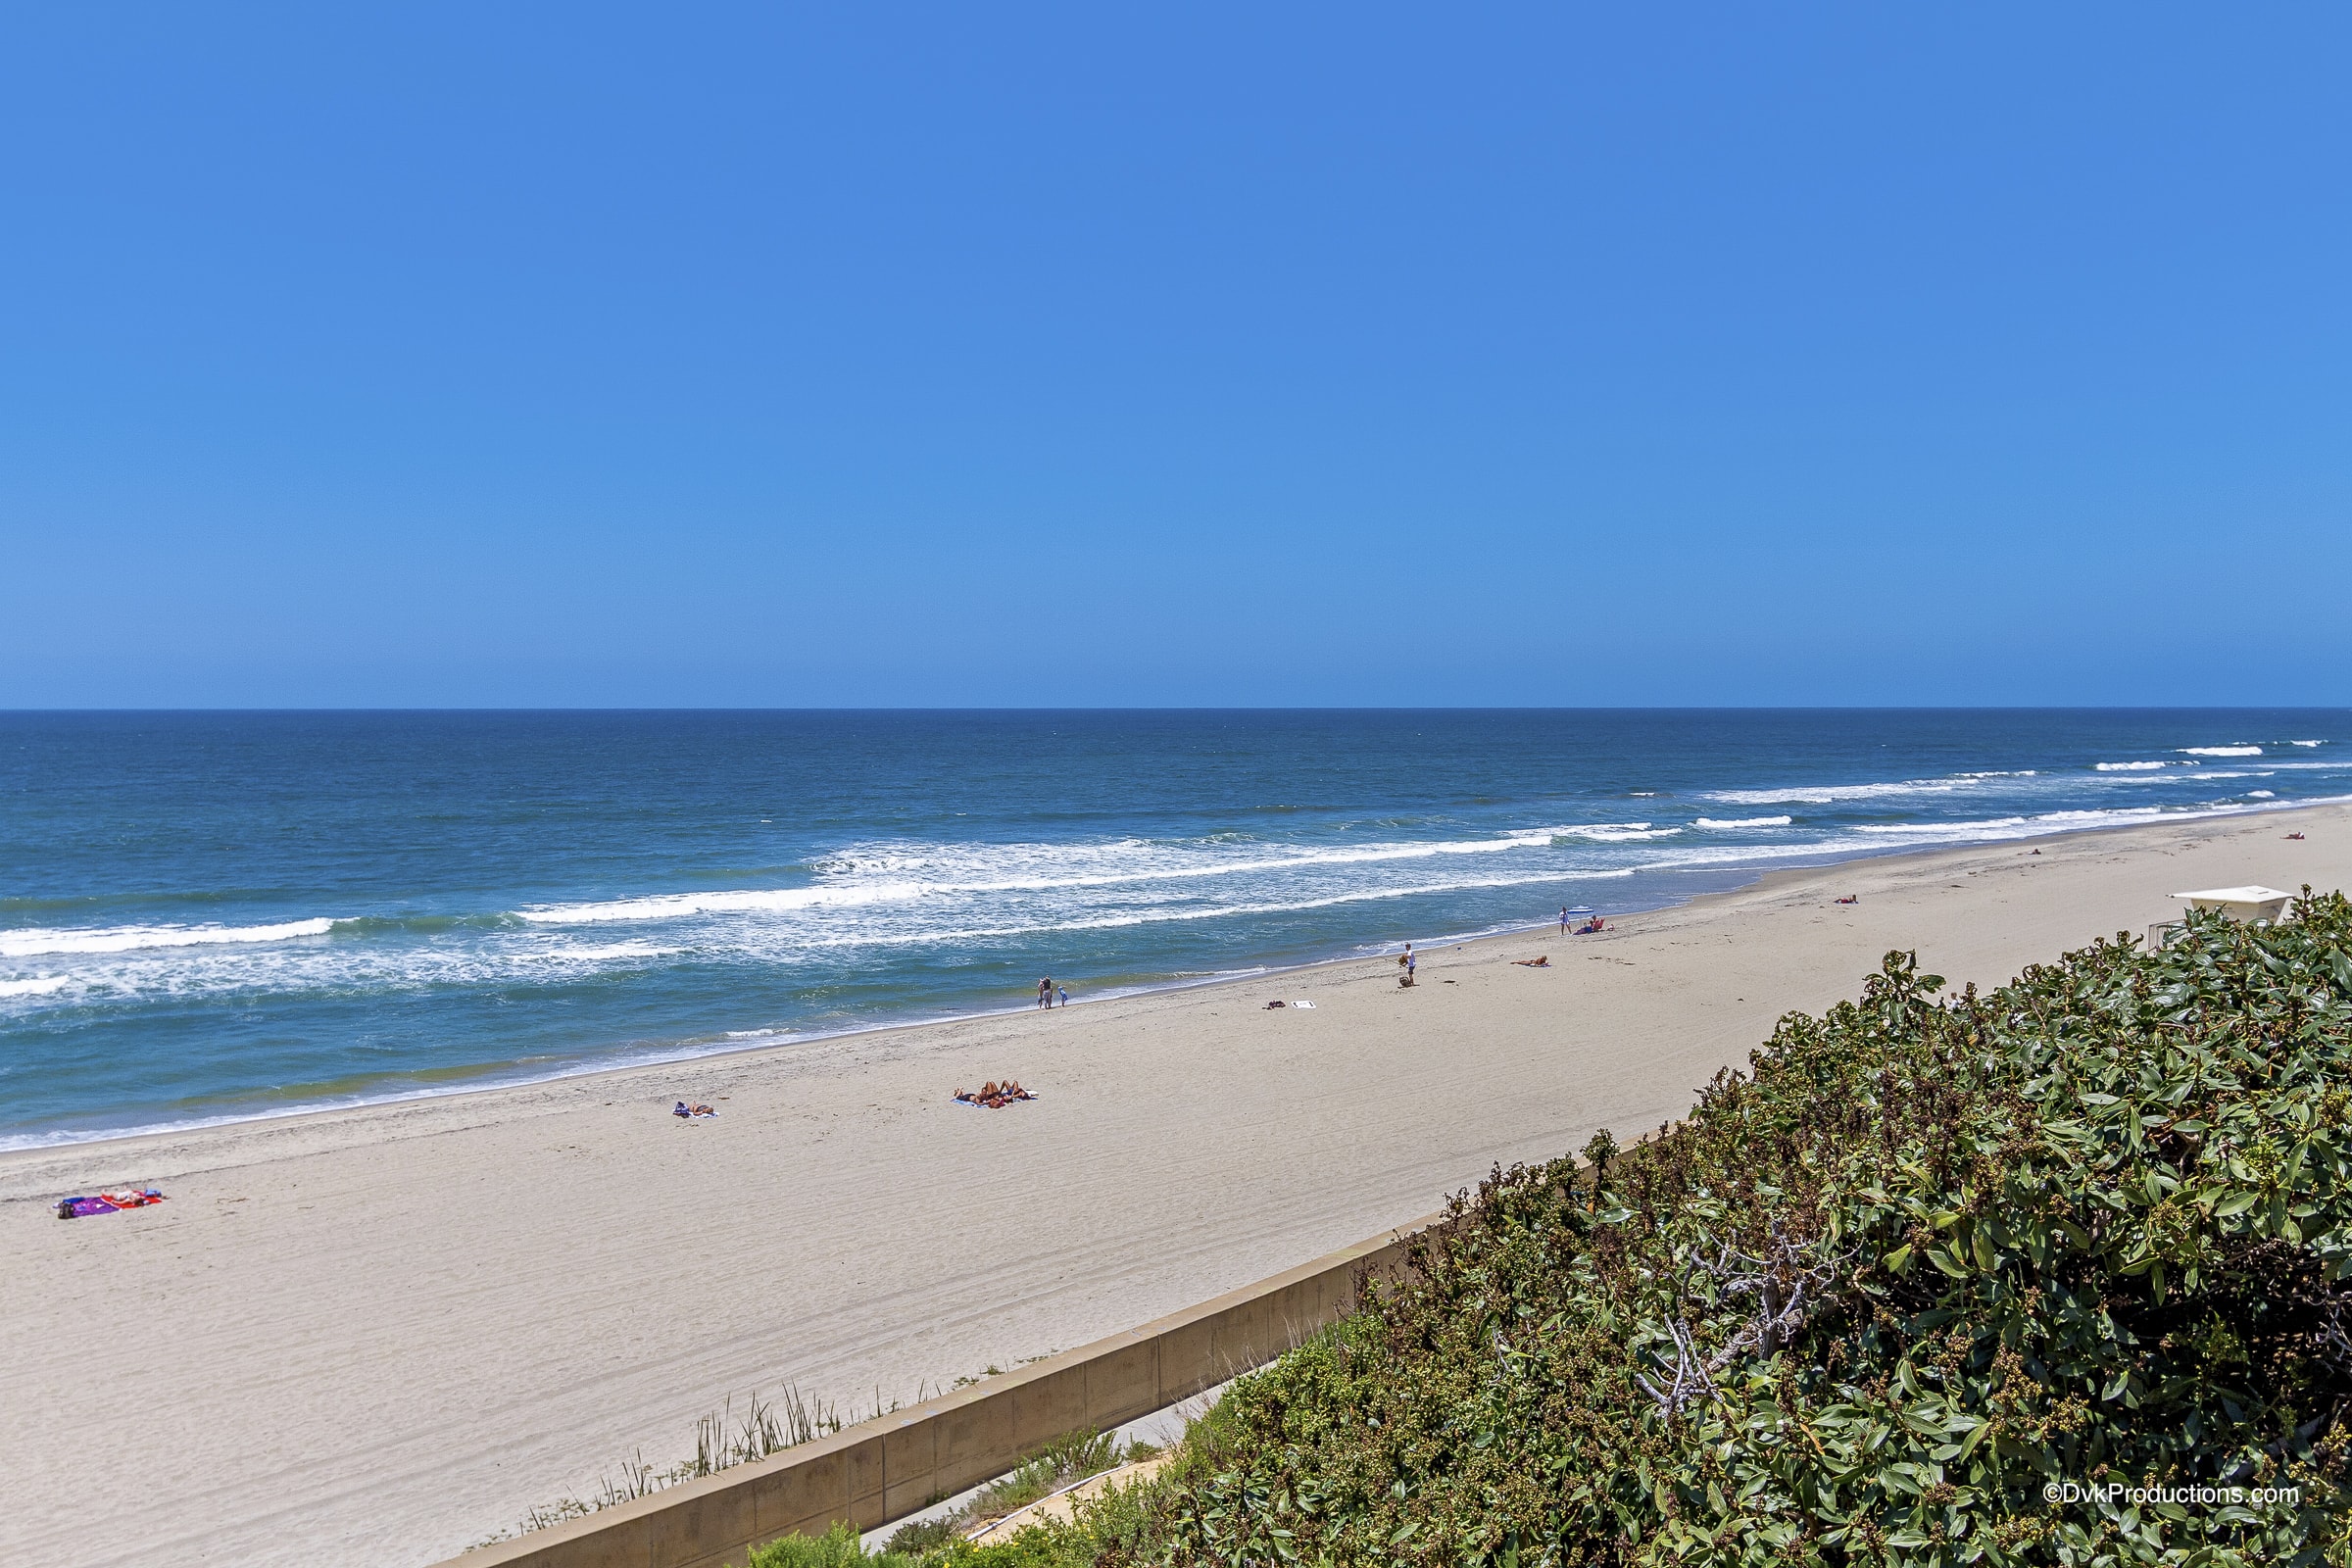 WHY CHOOSE SOCAL BEACH VACATIONS TO PROVIDE A PERFECT VACATION RENTAL?